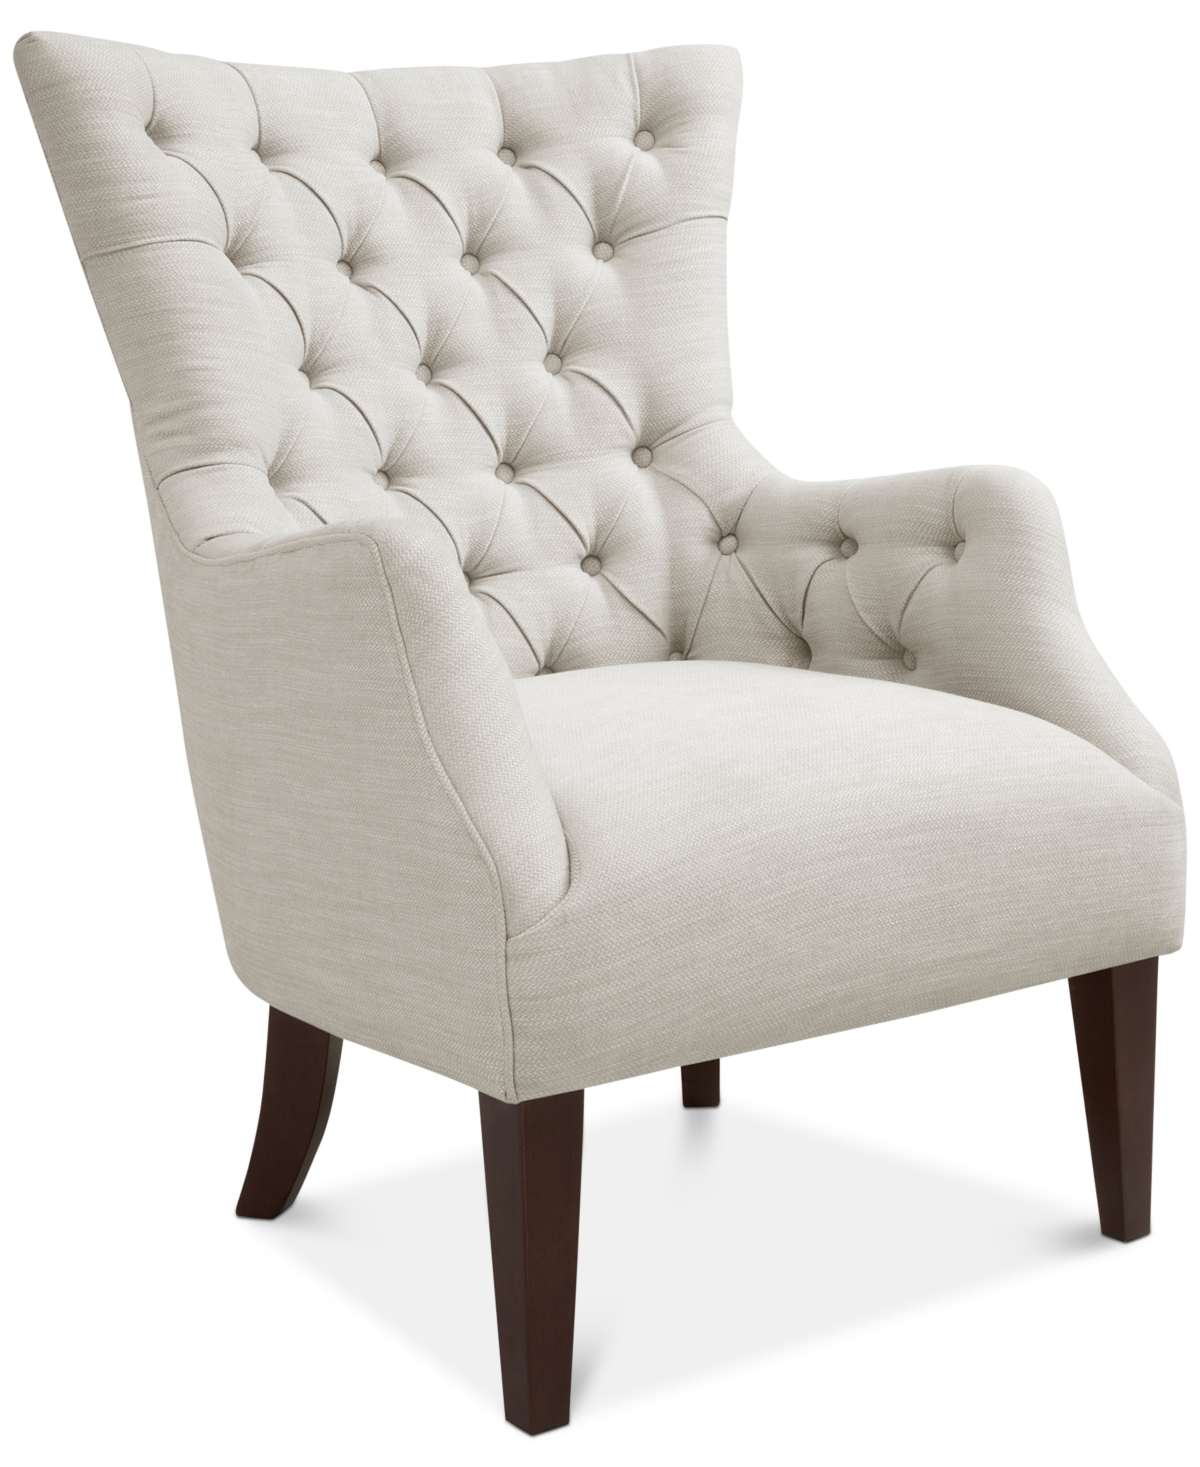 2471389 Adelyn Button Tufted Wing Back Chair sku 2471389